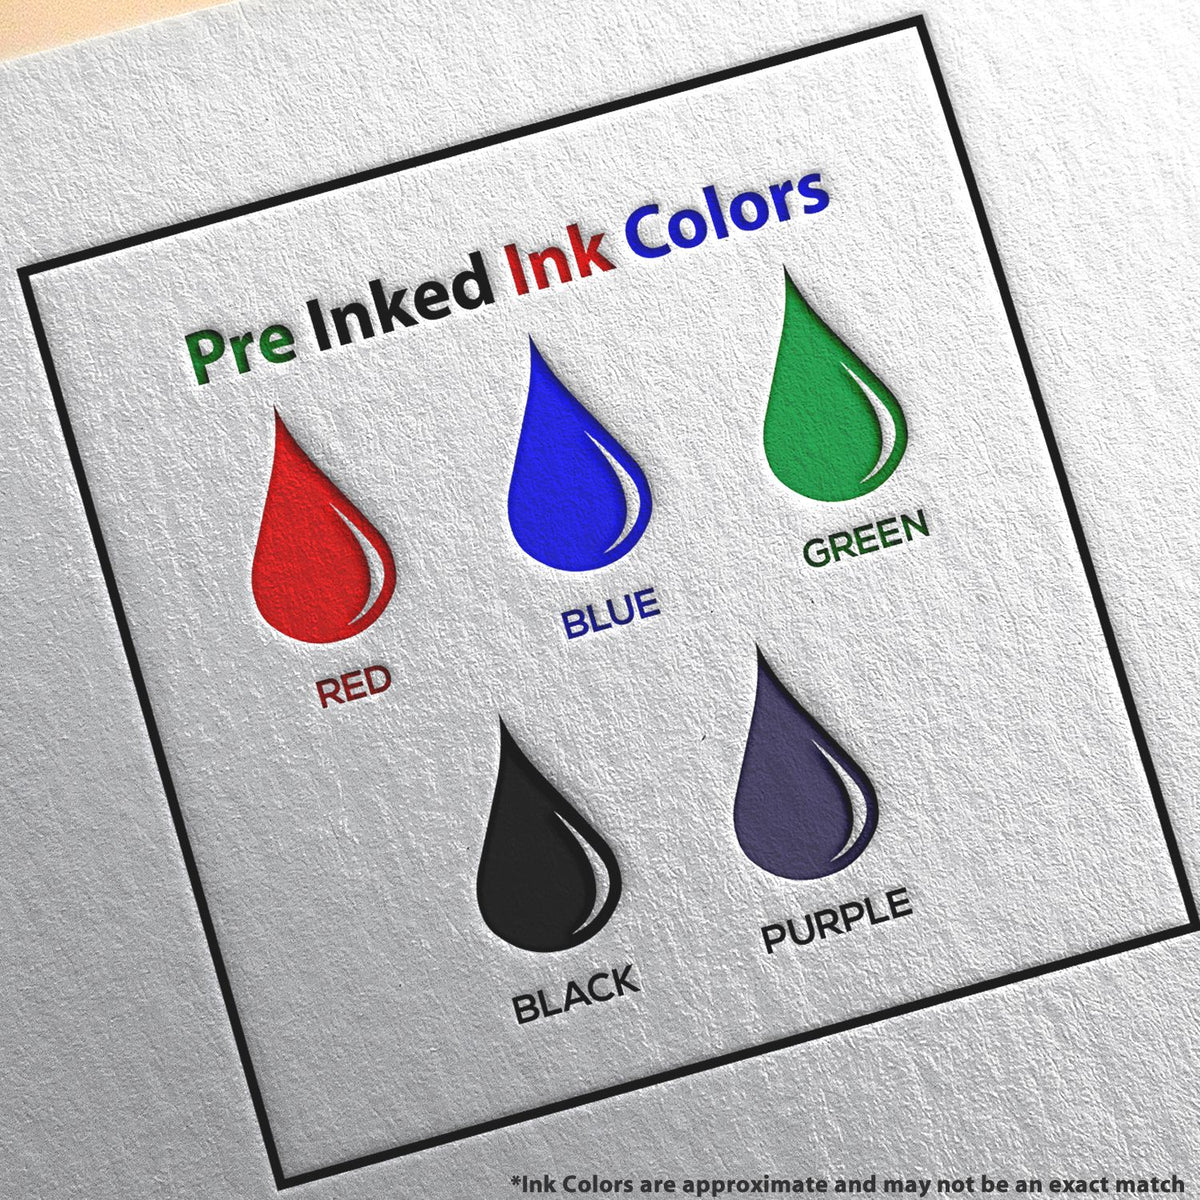 A picture showing the different ink colors or hues available for the Premium MaxLight Pre-Inked Massachusetts Landscape Architectural Stamp product.